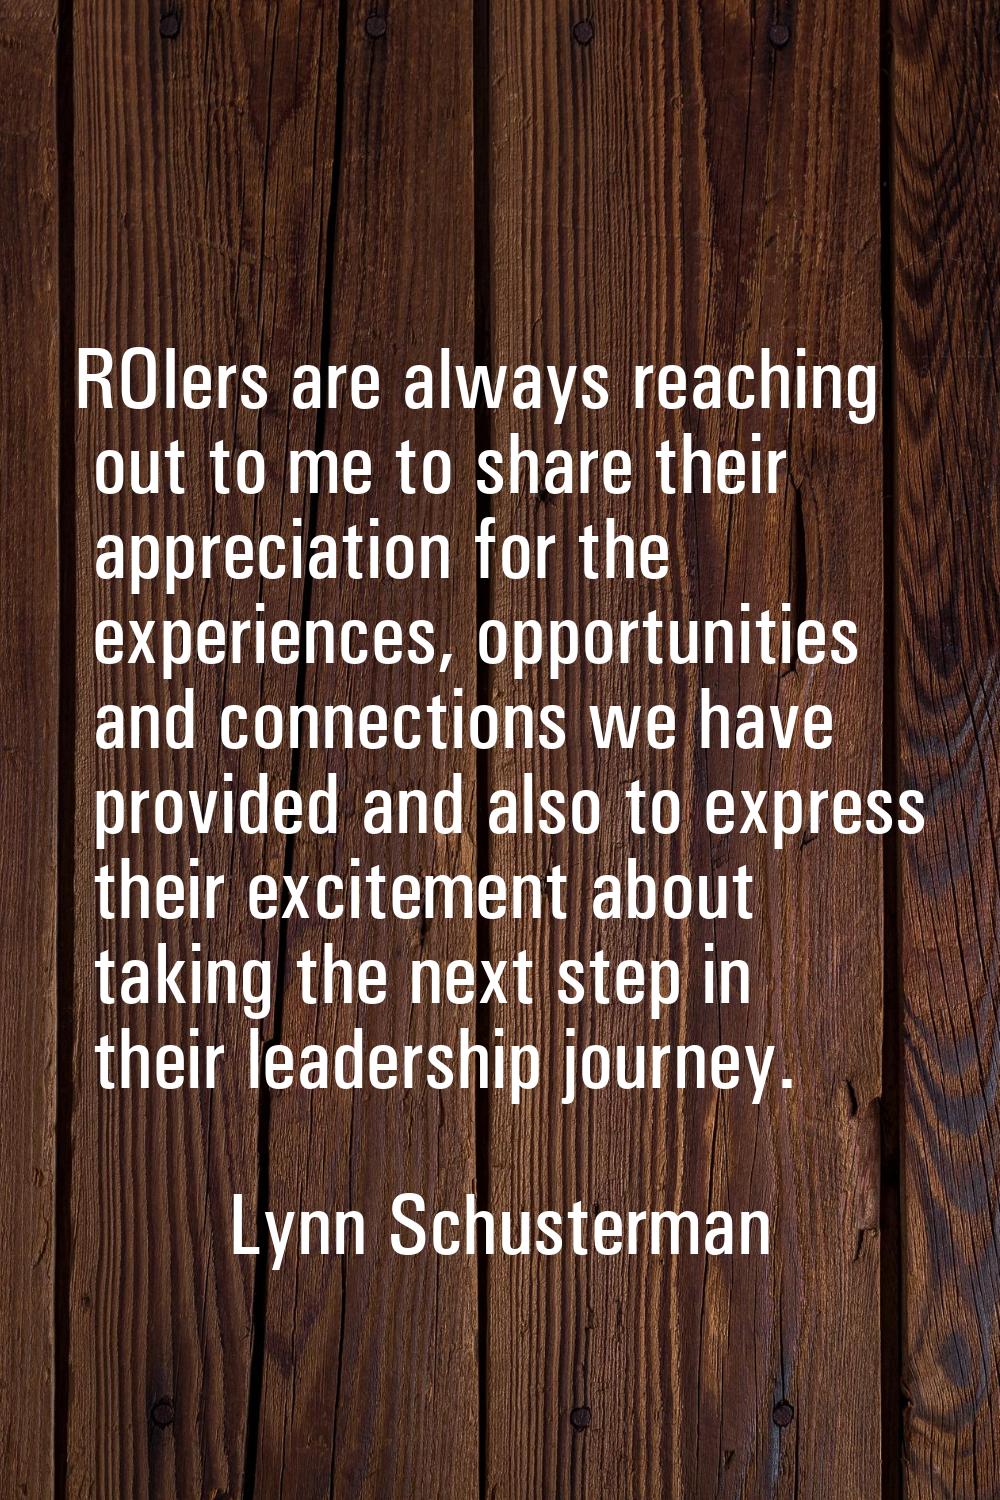 ROIers are always reaching out to me to share their appreciation for the experiences, opportunities